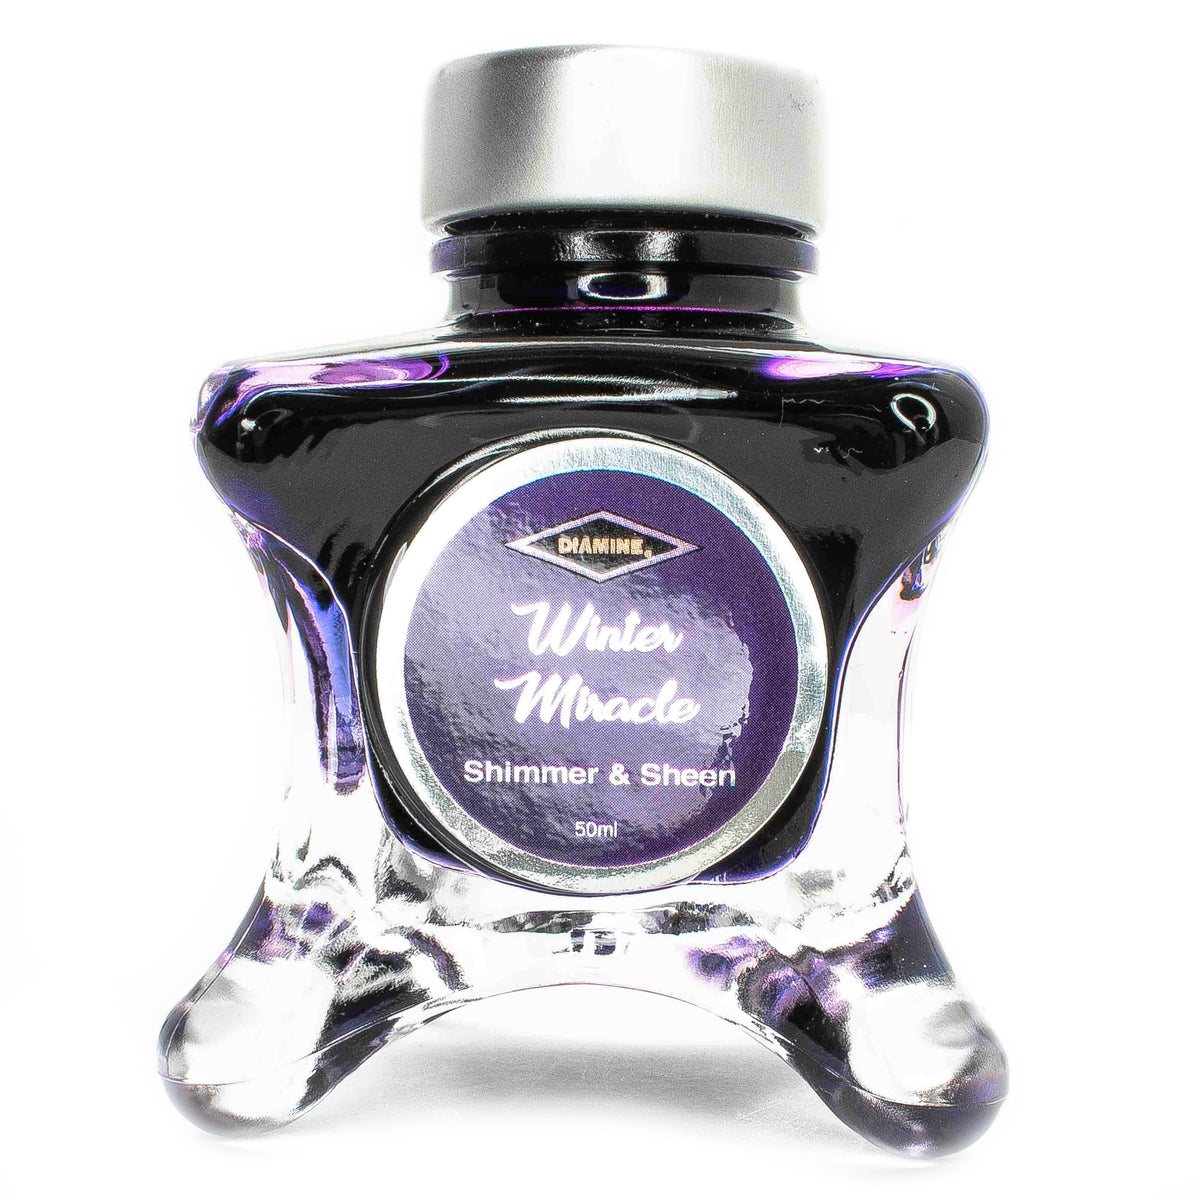 Diamine Blue Edition inks are available in 50ml glass bottle that features a whimsical shape.